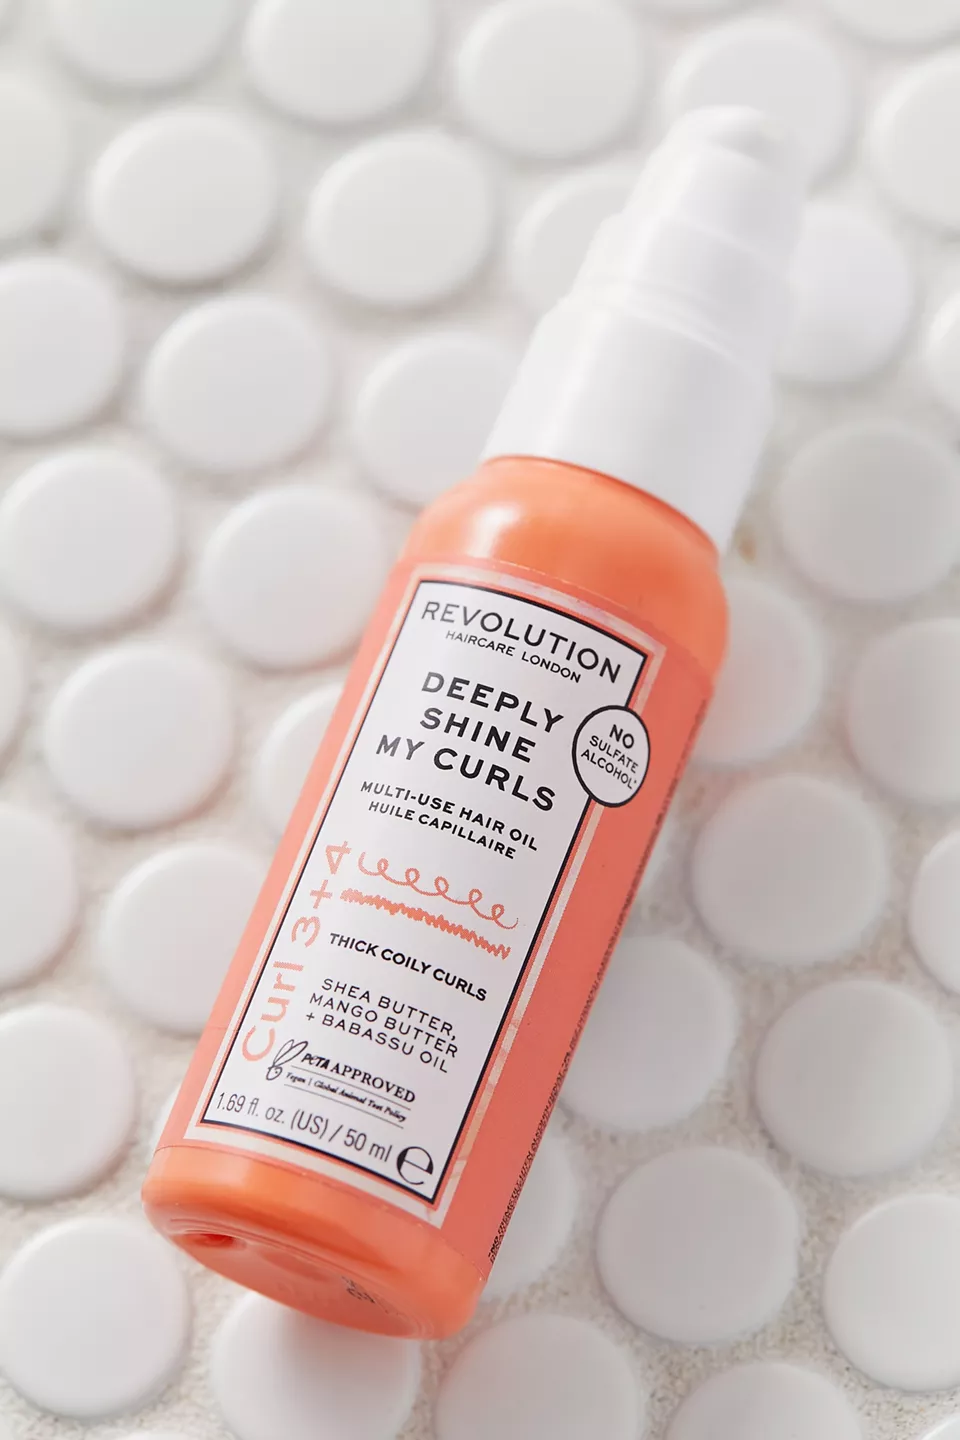 urbanoutfitters.com | Revolution Beauty Deeply Shine My Curls Multiuse Oil